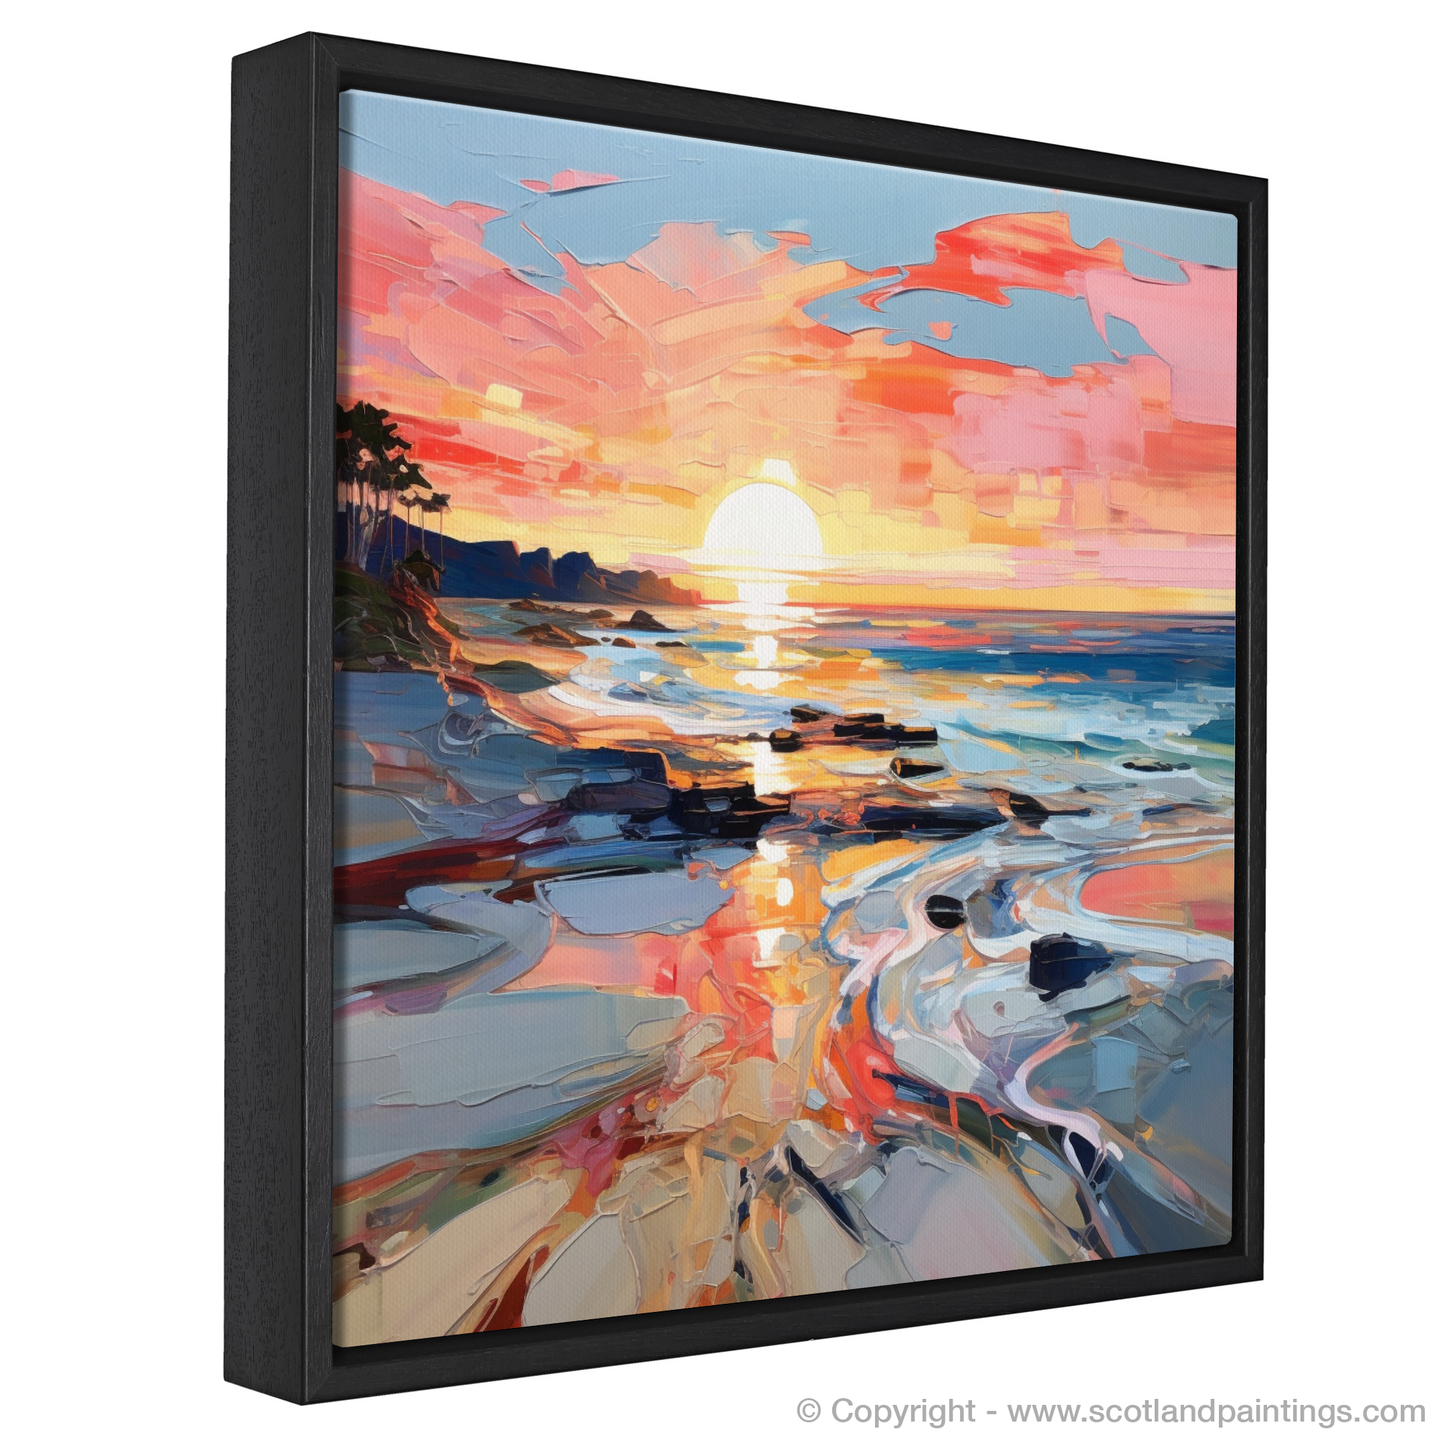 Painting and Art Print of Coral Beach at sunset entitled "Sunset Embrace at Coral Beach".